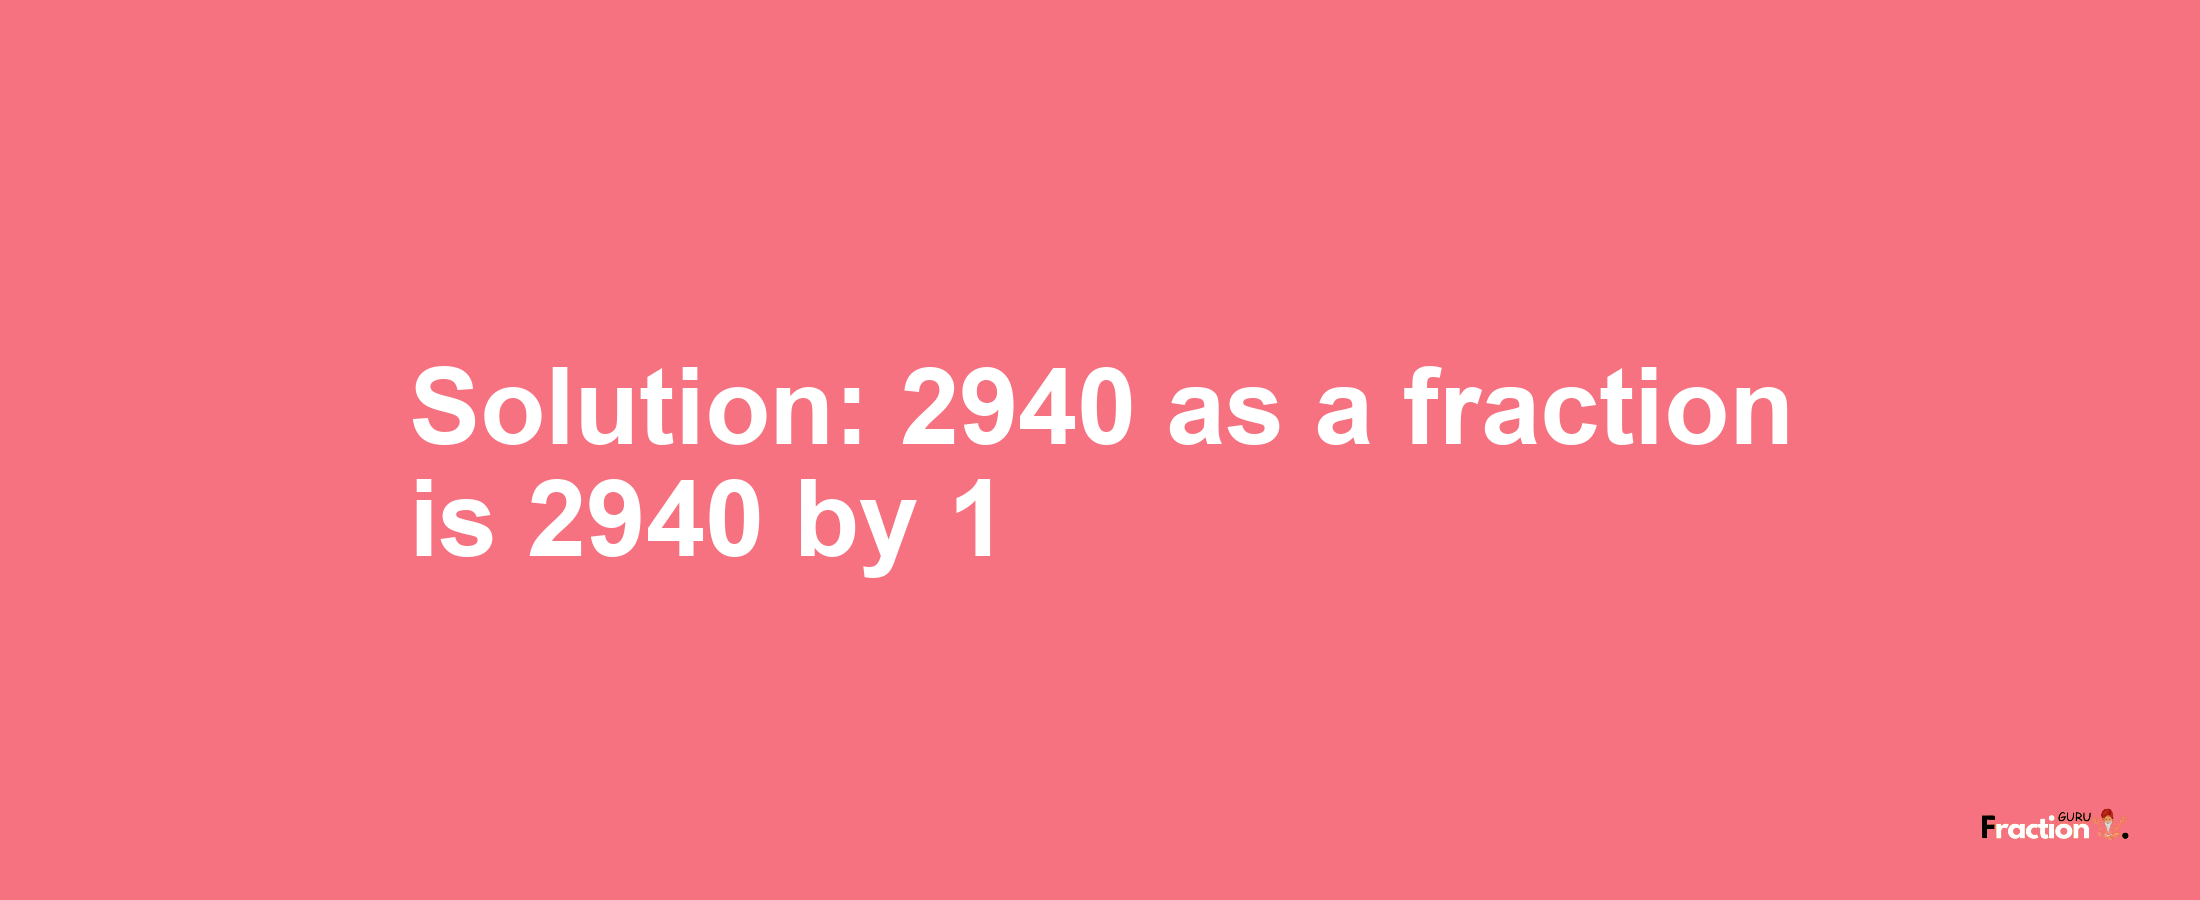 Solution:2940 as a fraction is 2940/1